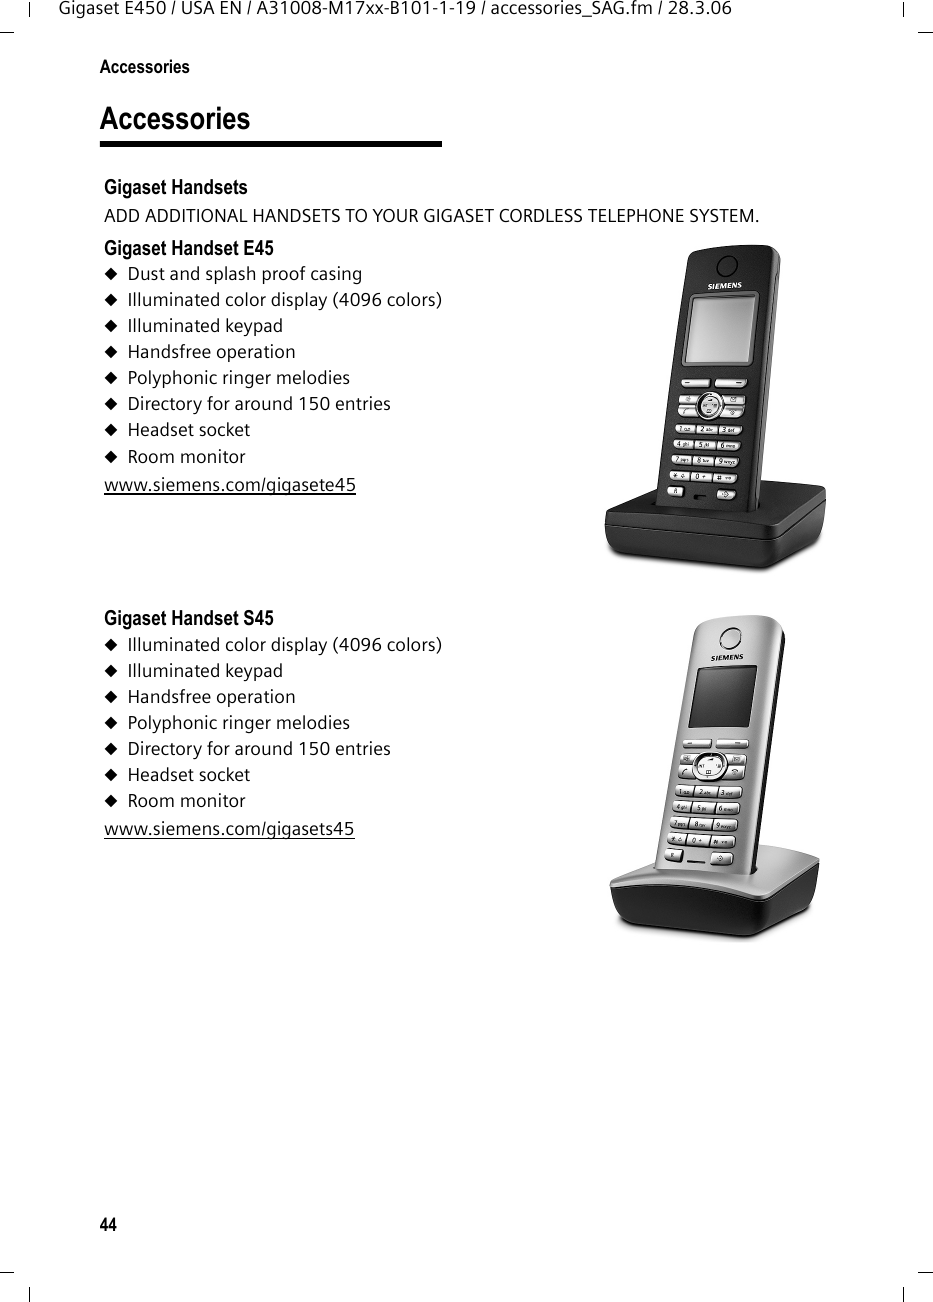 44AccessoriesGigaset E450 / USA EN / A31008-M17xx-B101-1-19 / accessories_SAG.fm / 28.3.06AccessoriesGigaset HandsetsADD ADDITIONAL HANDSETS TO YOUR GIGASET CORDLESS TELEPHONE SYSTEM.Gigaset Handset E45uDust and splash proof casinguIlluminated color display (4096 colors)uIlluminated keypaduHandsfree operationuPolyphonic ringer melodiesuDirectory for around 150 entriesuHeadset socketuRoom monitorwww.siemens.com/gigasete45 Gigaset Handset S45uIlluminated color display (4096 colors)uIlluminated keypaduHandsfree operationuPolyphonic ringer melodiesuDirectory for around 150 entriesuHeadset socketuRoom monitorwww.siemens.com/gigasets45 